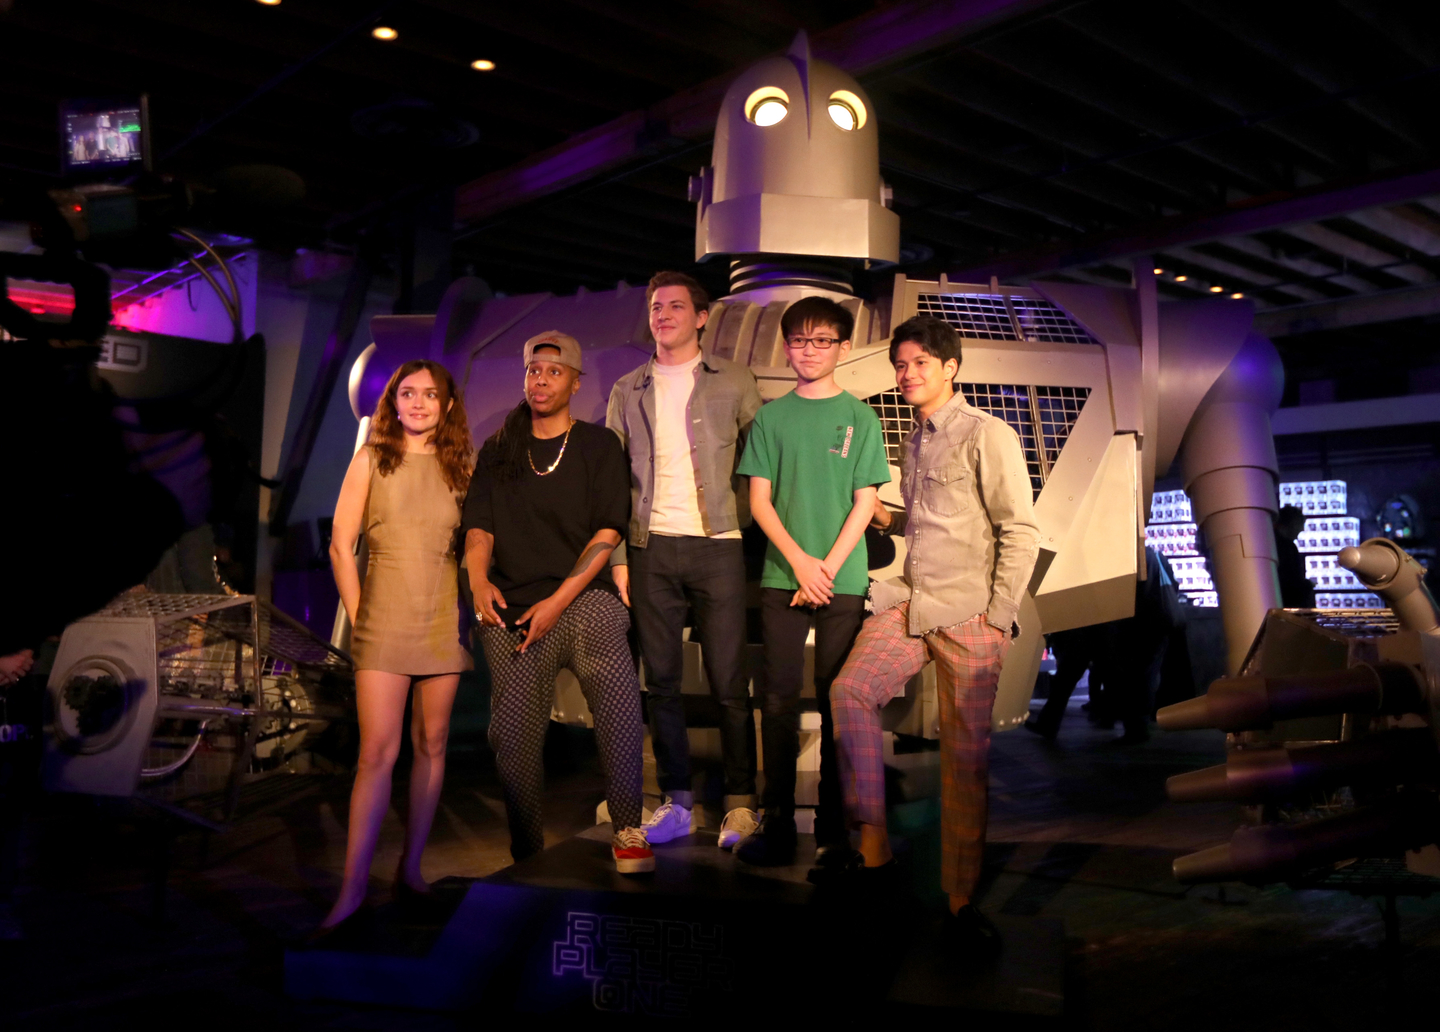 Ready Player One cast members Olivia Cooke, Lena Waithe, Tye Sheridan, Philip Zhao and Win Morisaki visited the Ready Player One Experience with VIVE VR before the movie’s world premiere. Photo by Diego Donamaria/Getty Images for SXSW